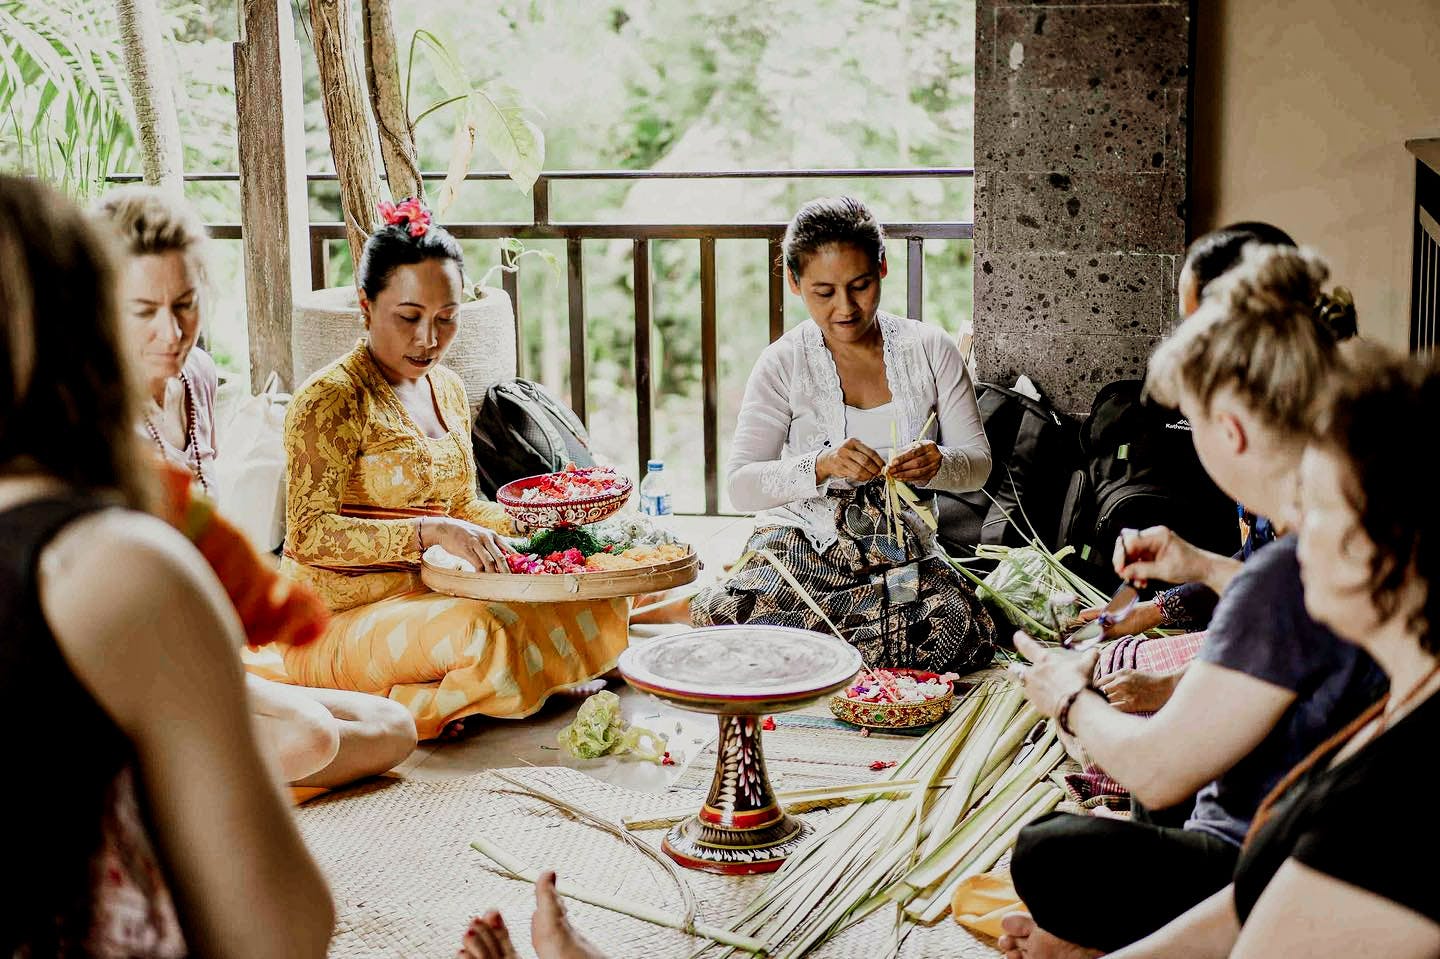 Learn the stories behind the Canang Sari, a tradition integral to Balinese life 